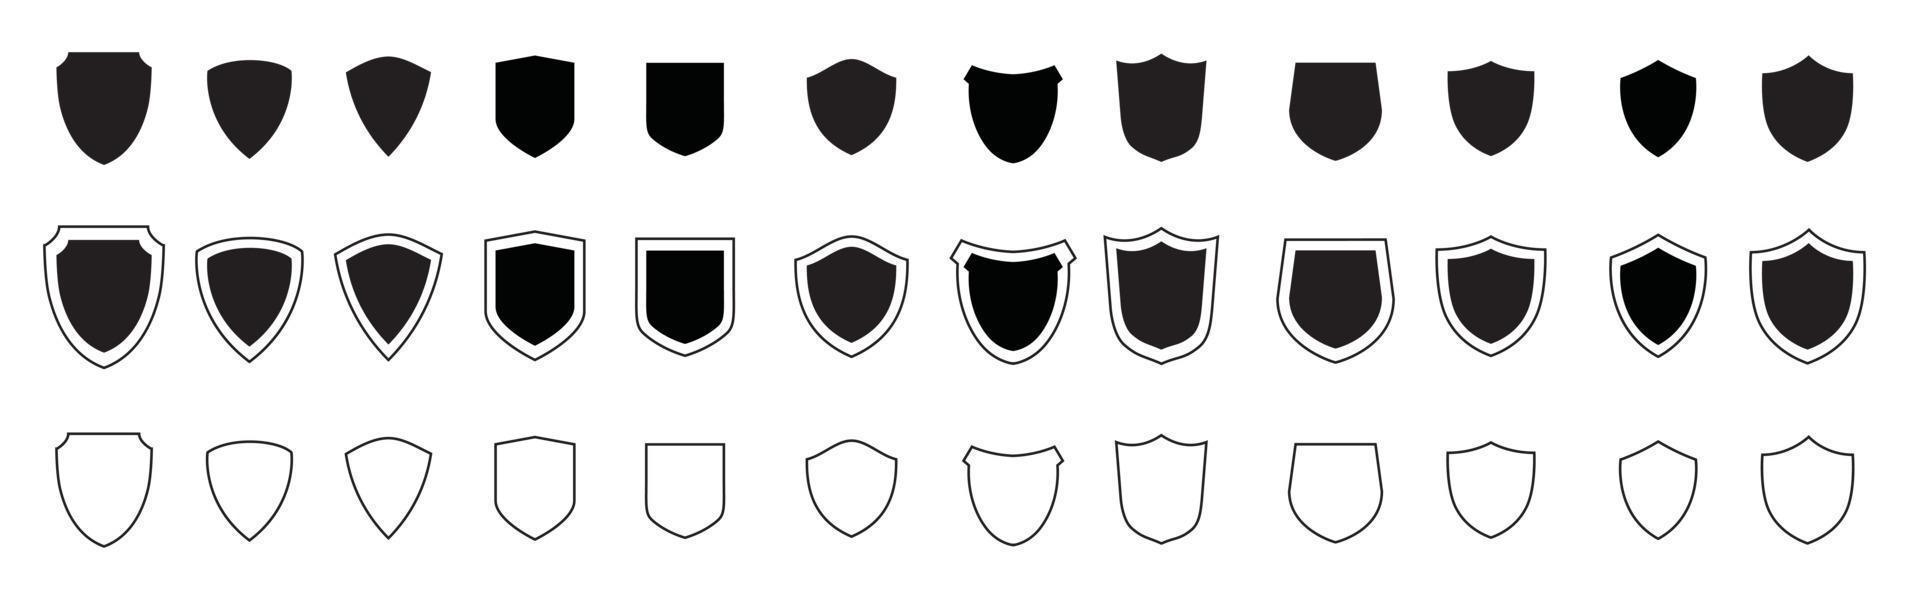 Shield black icons set. Protect shields silhouette collection. vector